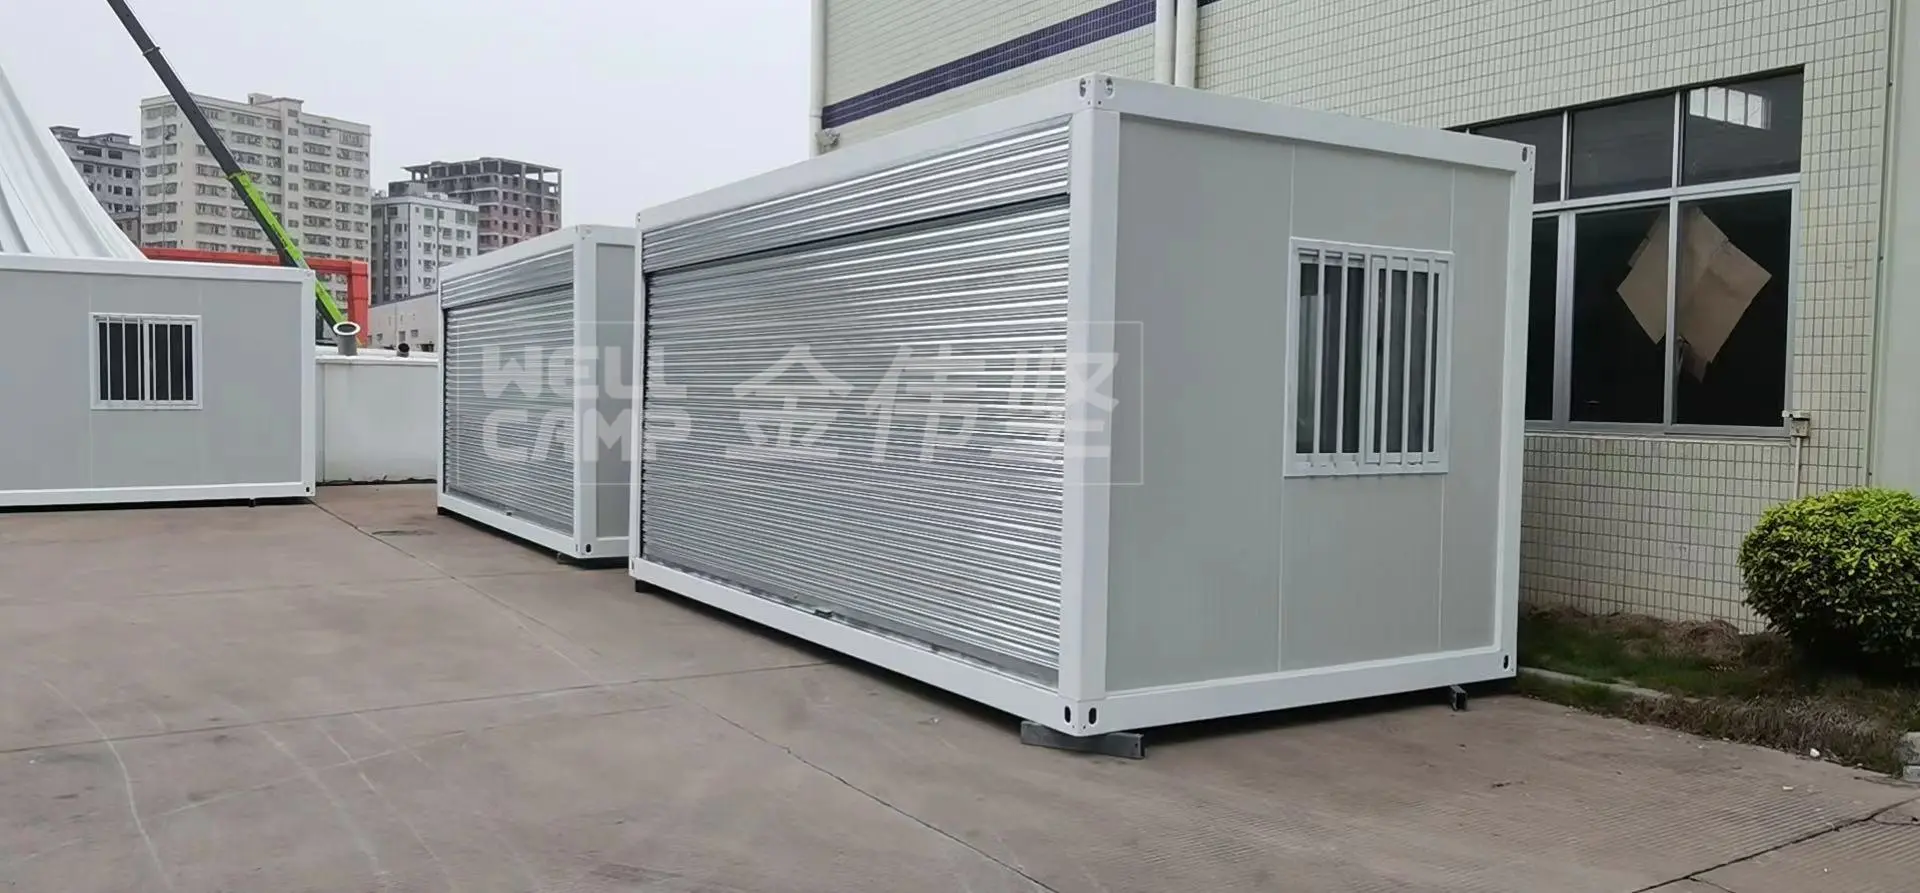 China Zhao Qing City Container Shop Project 48 Shops